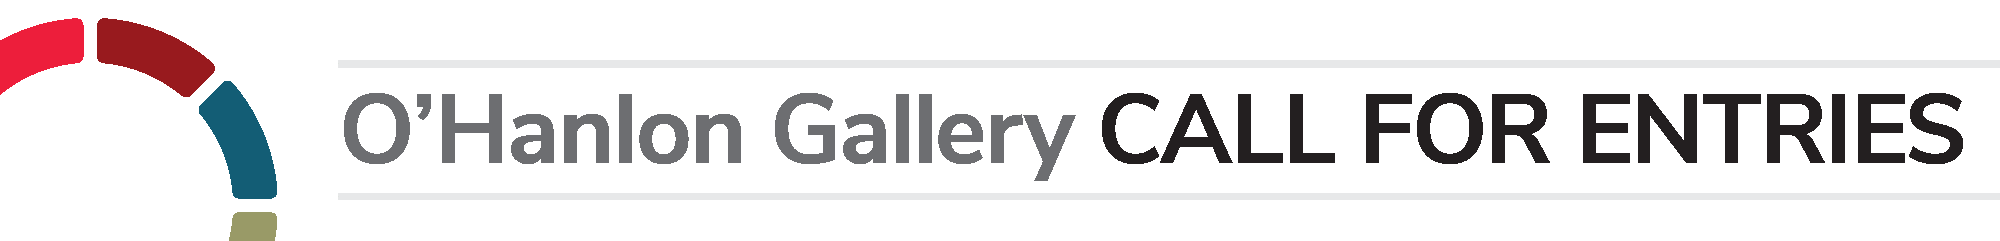 February Call for Entry